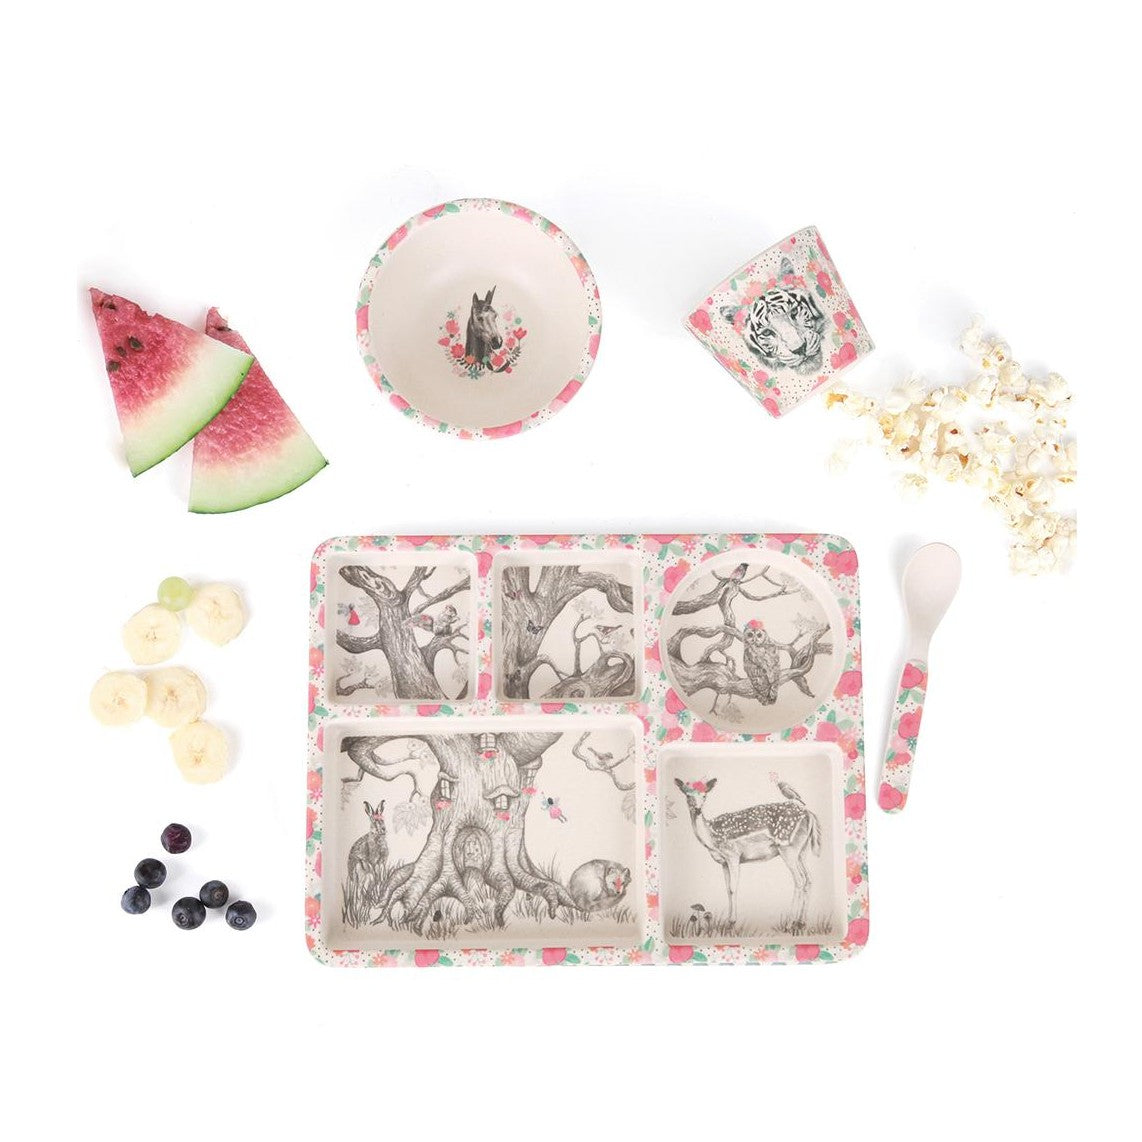 Enchanted Forest Divided Plate Set